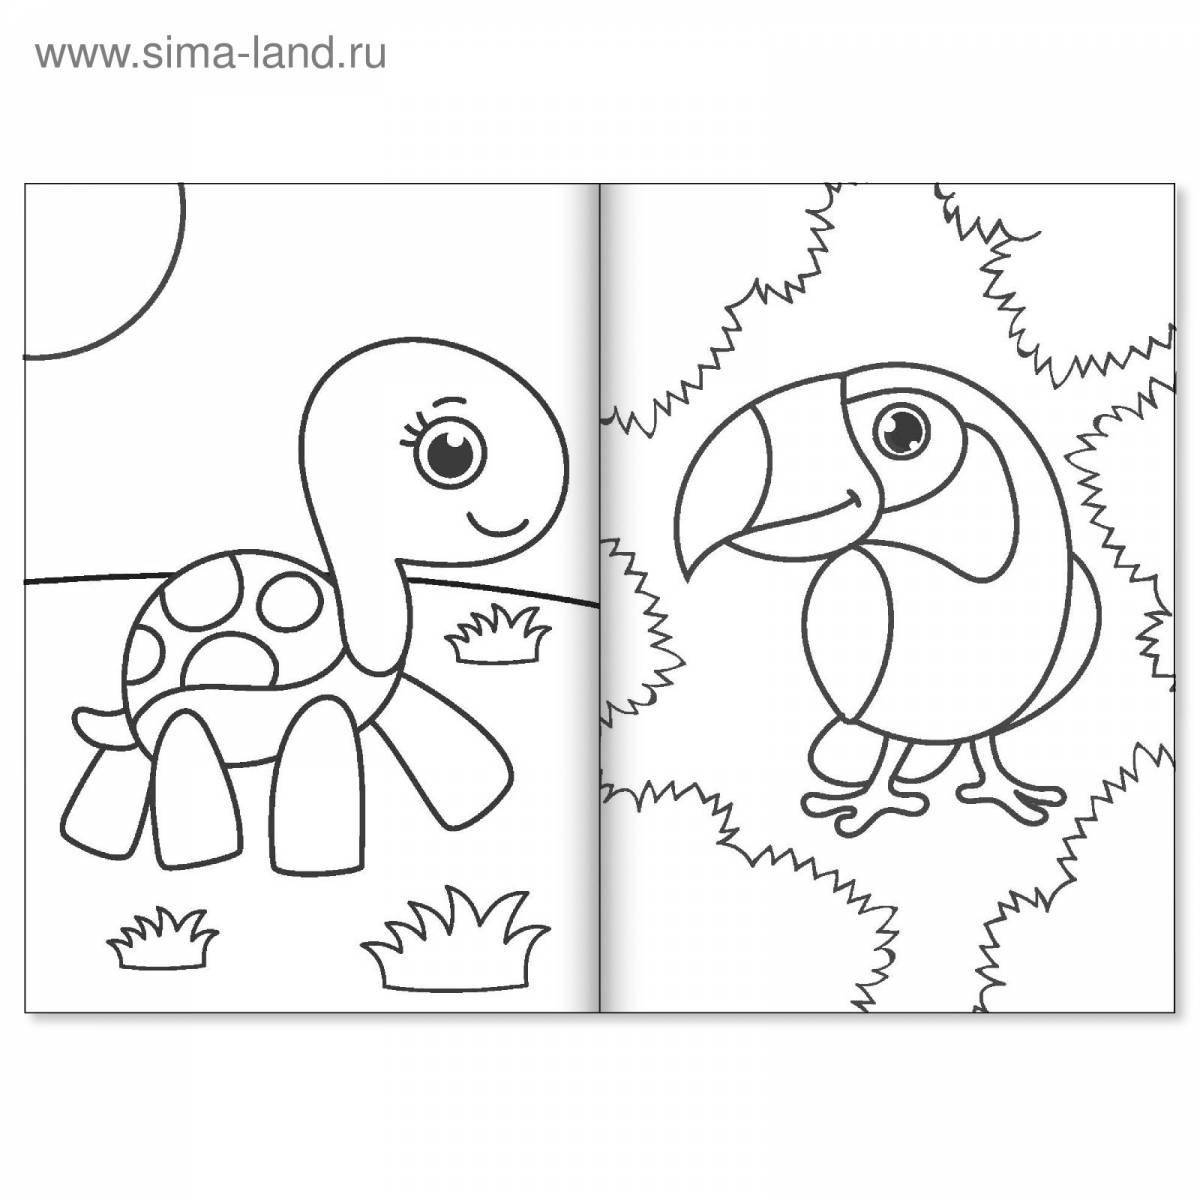 Playful coloring animals of cold countries for preschoolers